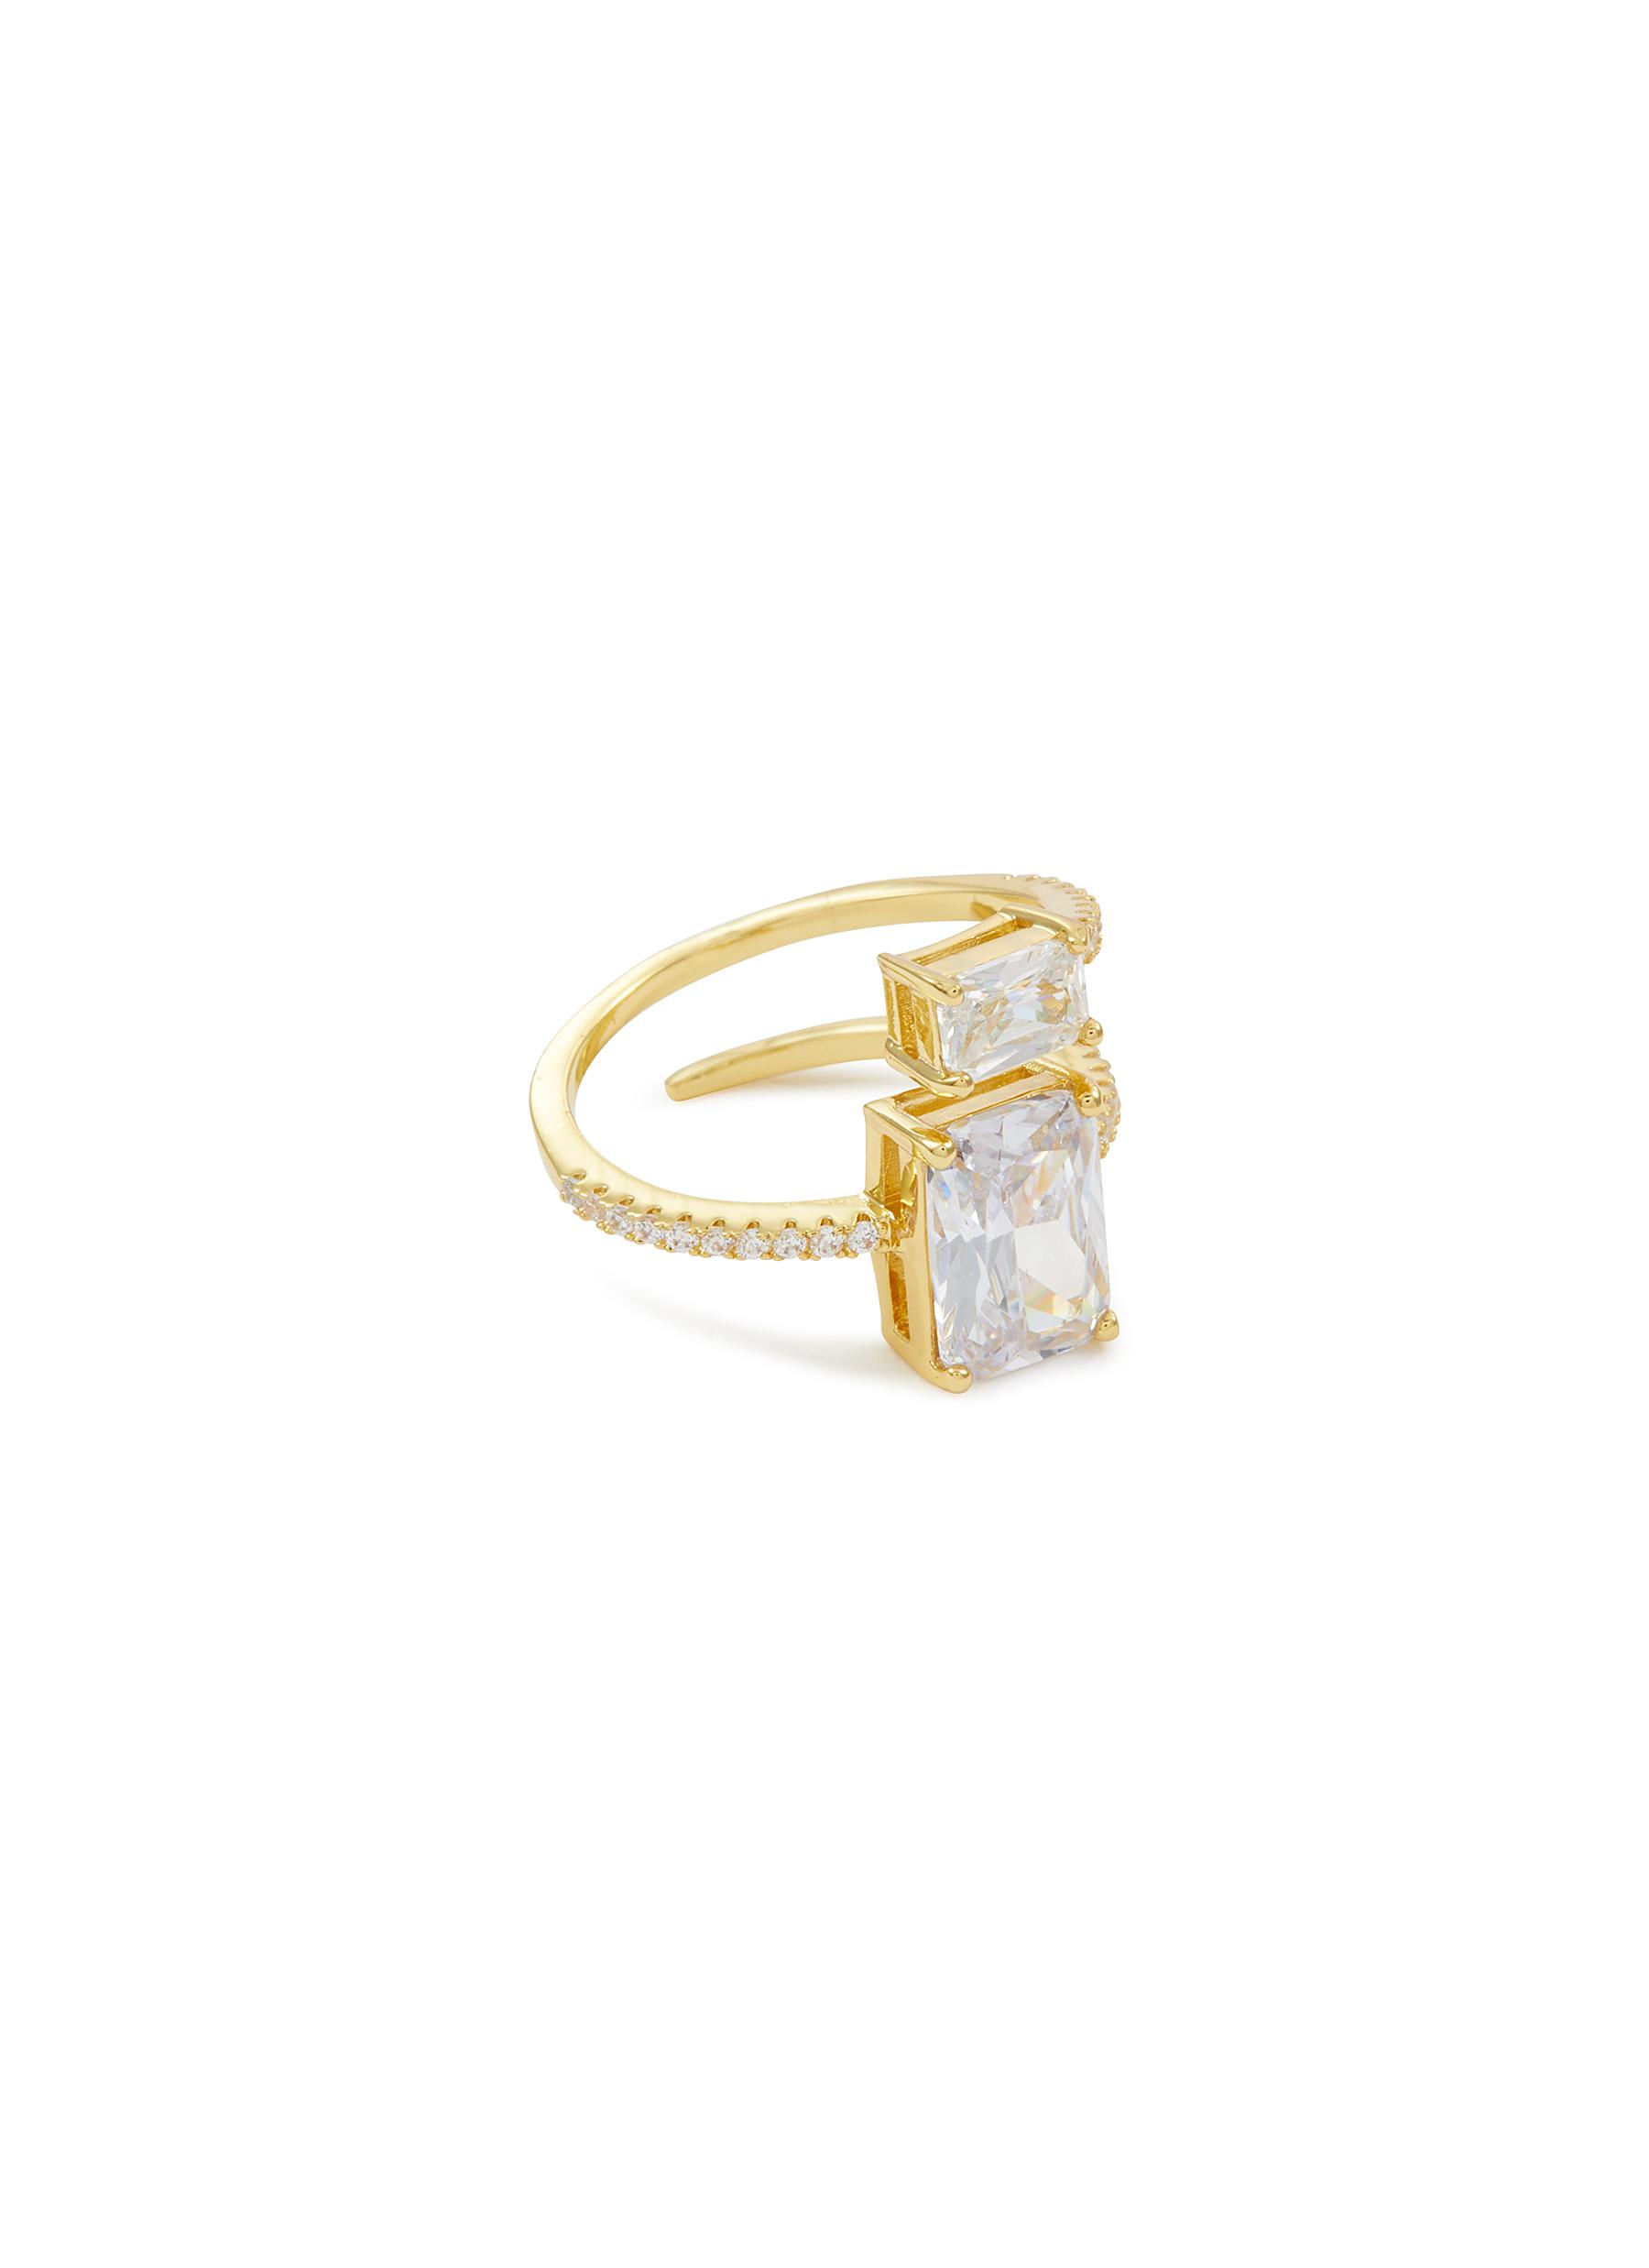 CZ BY KENNETH JAY LANE Gold Toned Metal Emerald Cut Cubic Zirconia Coil Ring